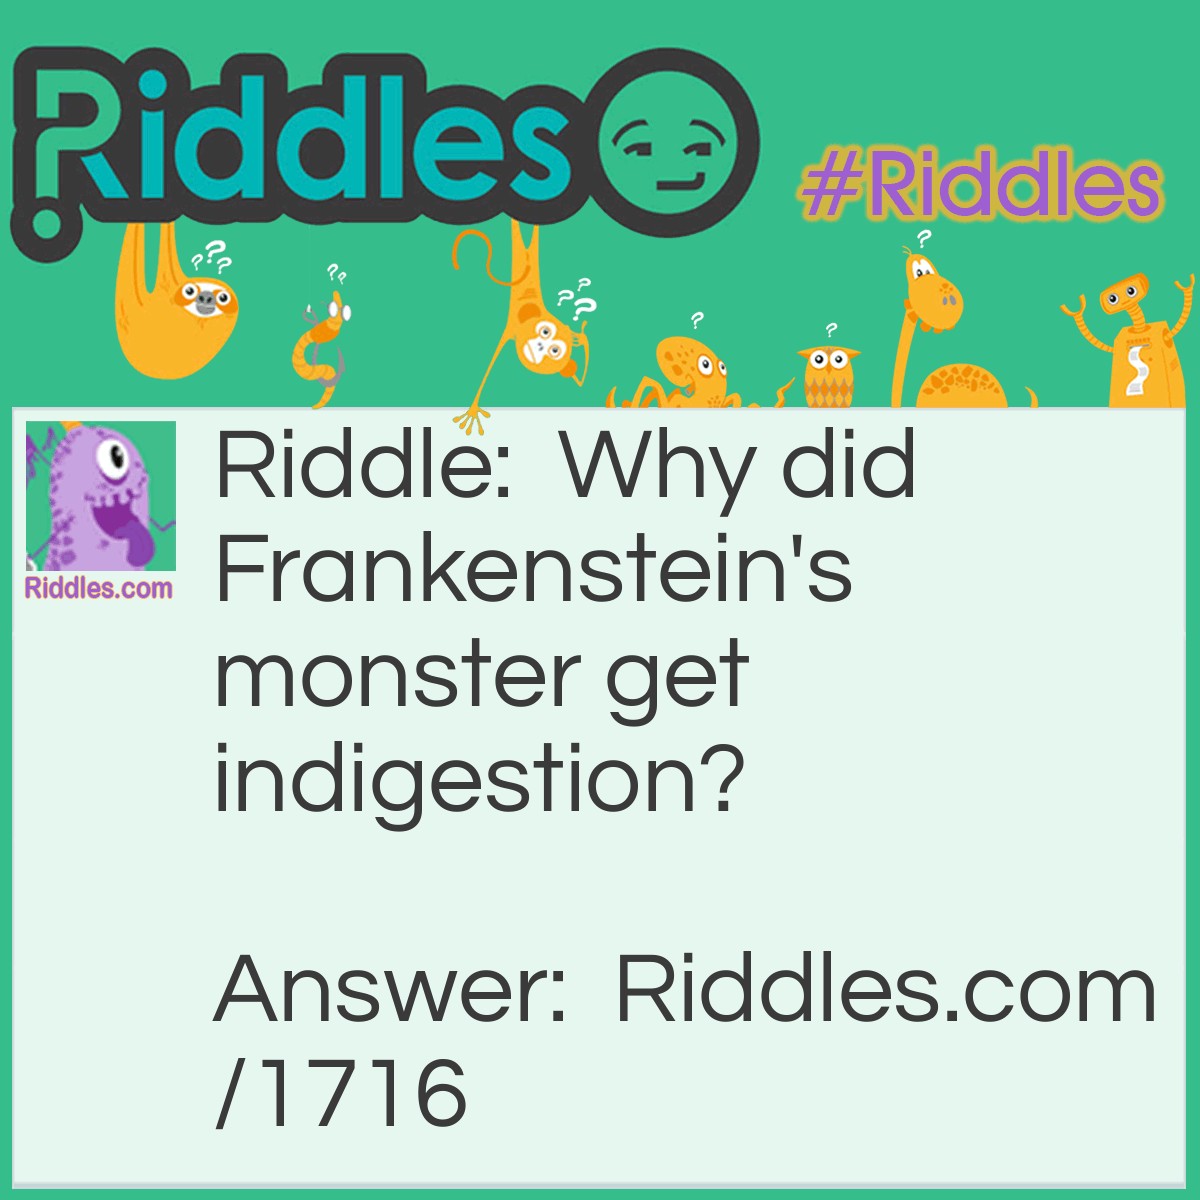 Riddle: Why did Frankenstein's monster get indigestion? Answer: He bolted down his food.